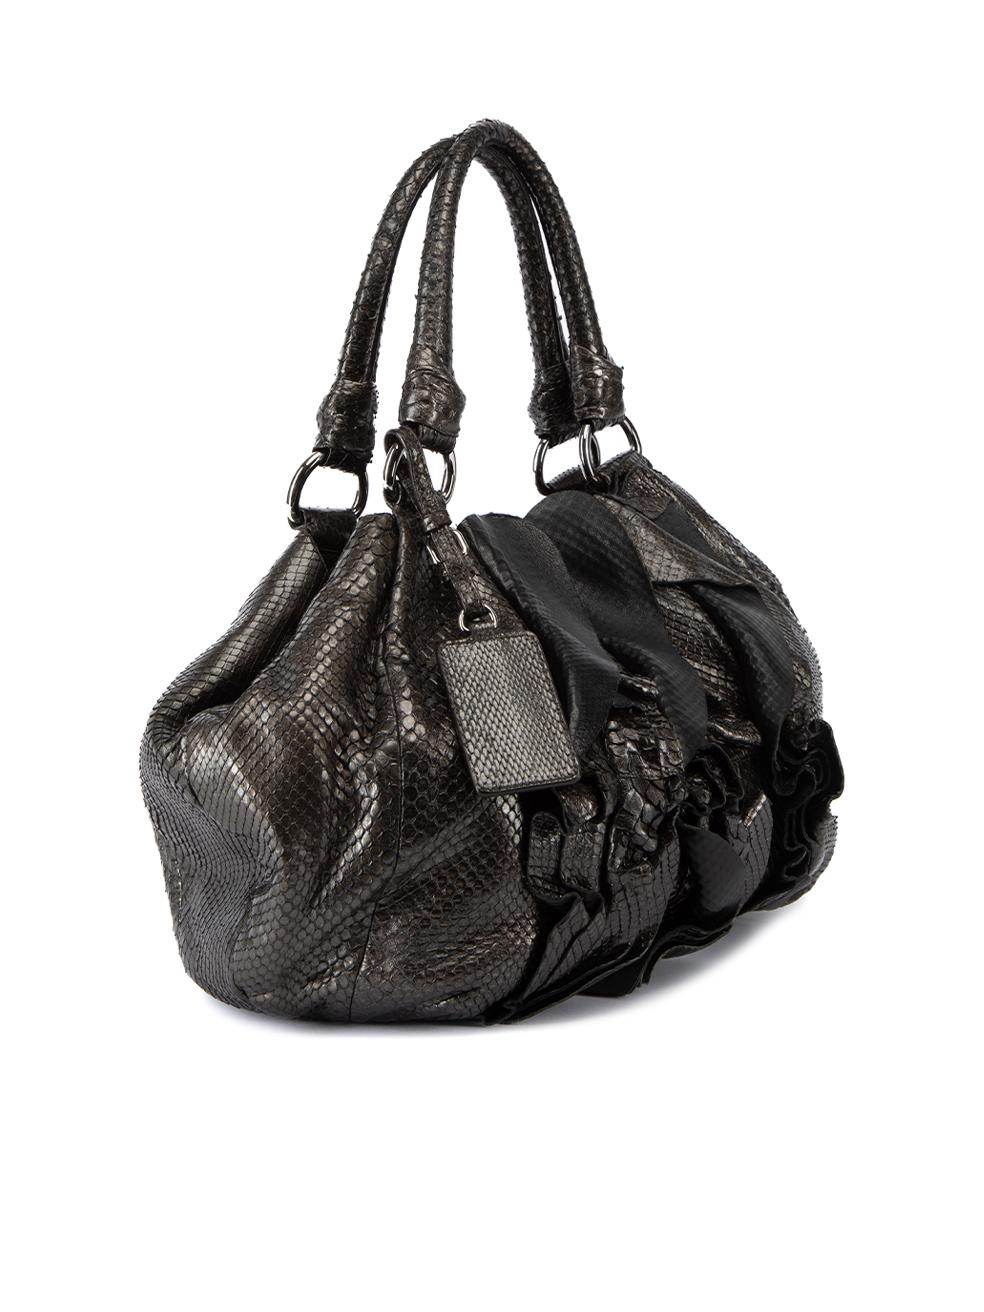 CONDITION is Very good. Minimal wear to bag is evident. Minimal wear to snakeskin leather exterior and bag interior on this used Prada designer resale item.

Details
Metallic grey
Snakeskin leather
Medium hobo bag
Layered ruffles design
Side snap